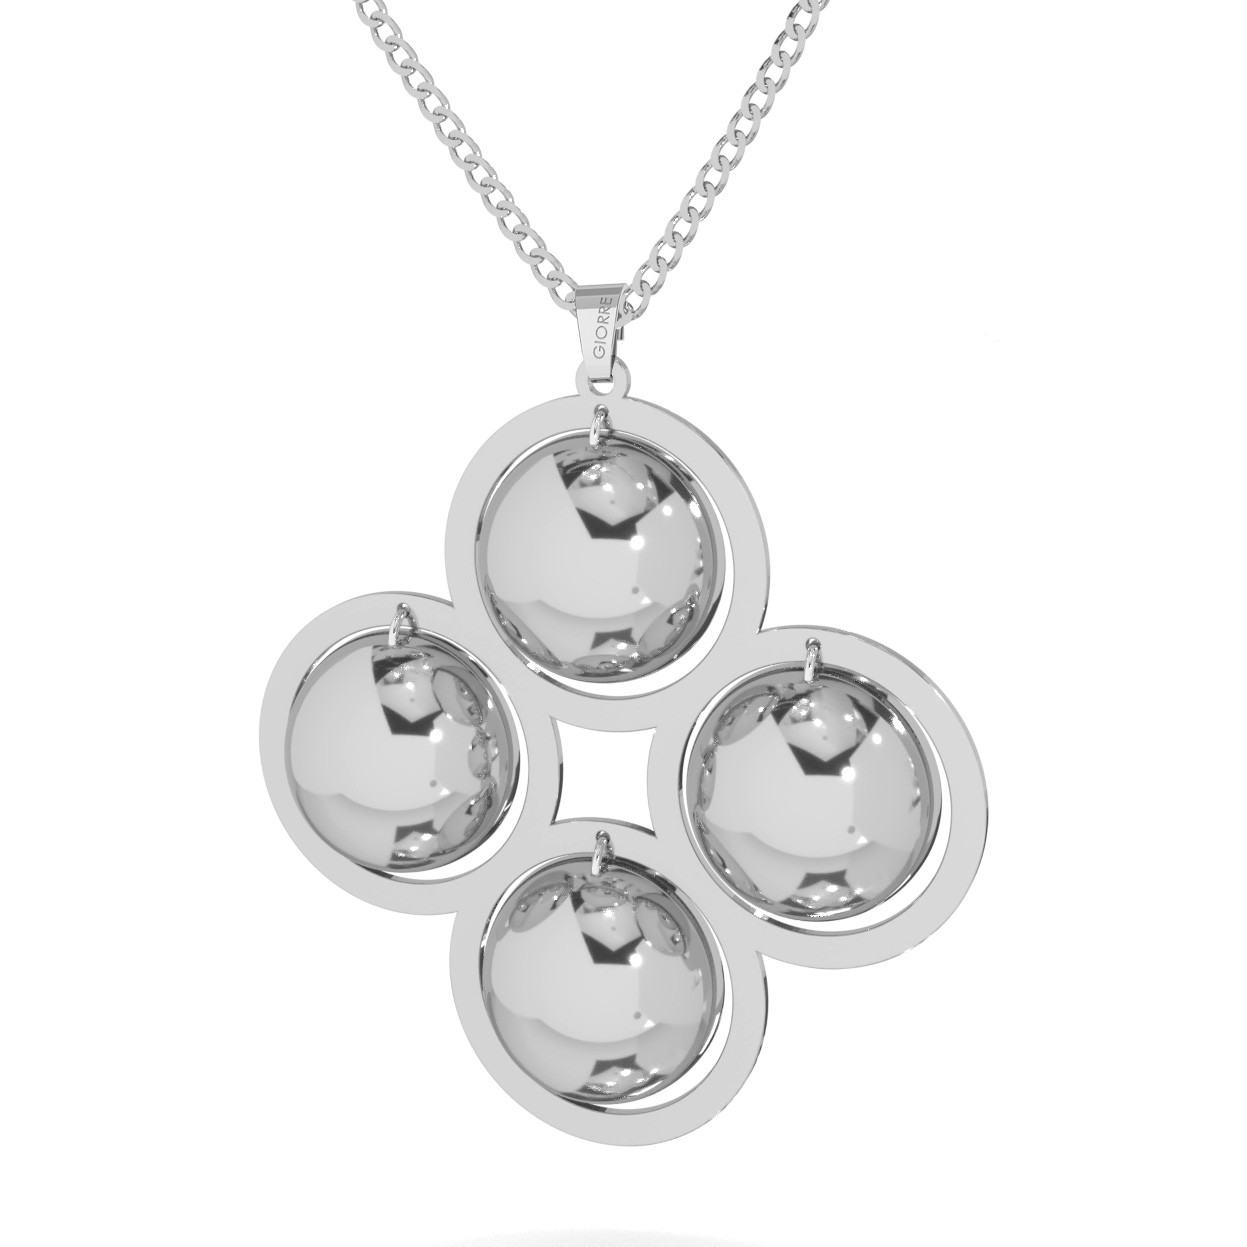 Woman necklace with long pendant sterling silver 925